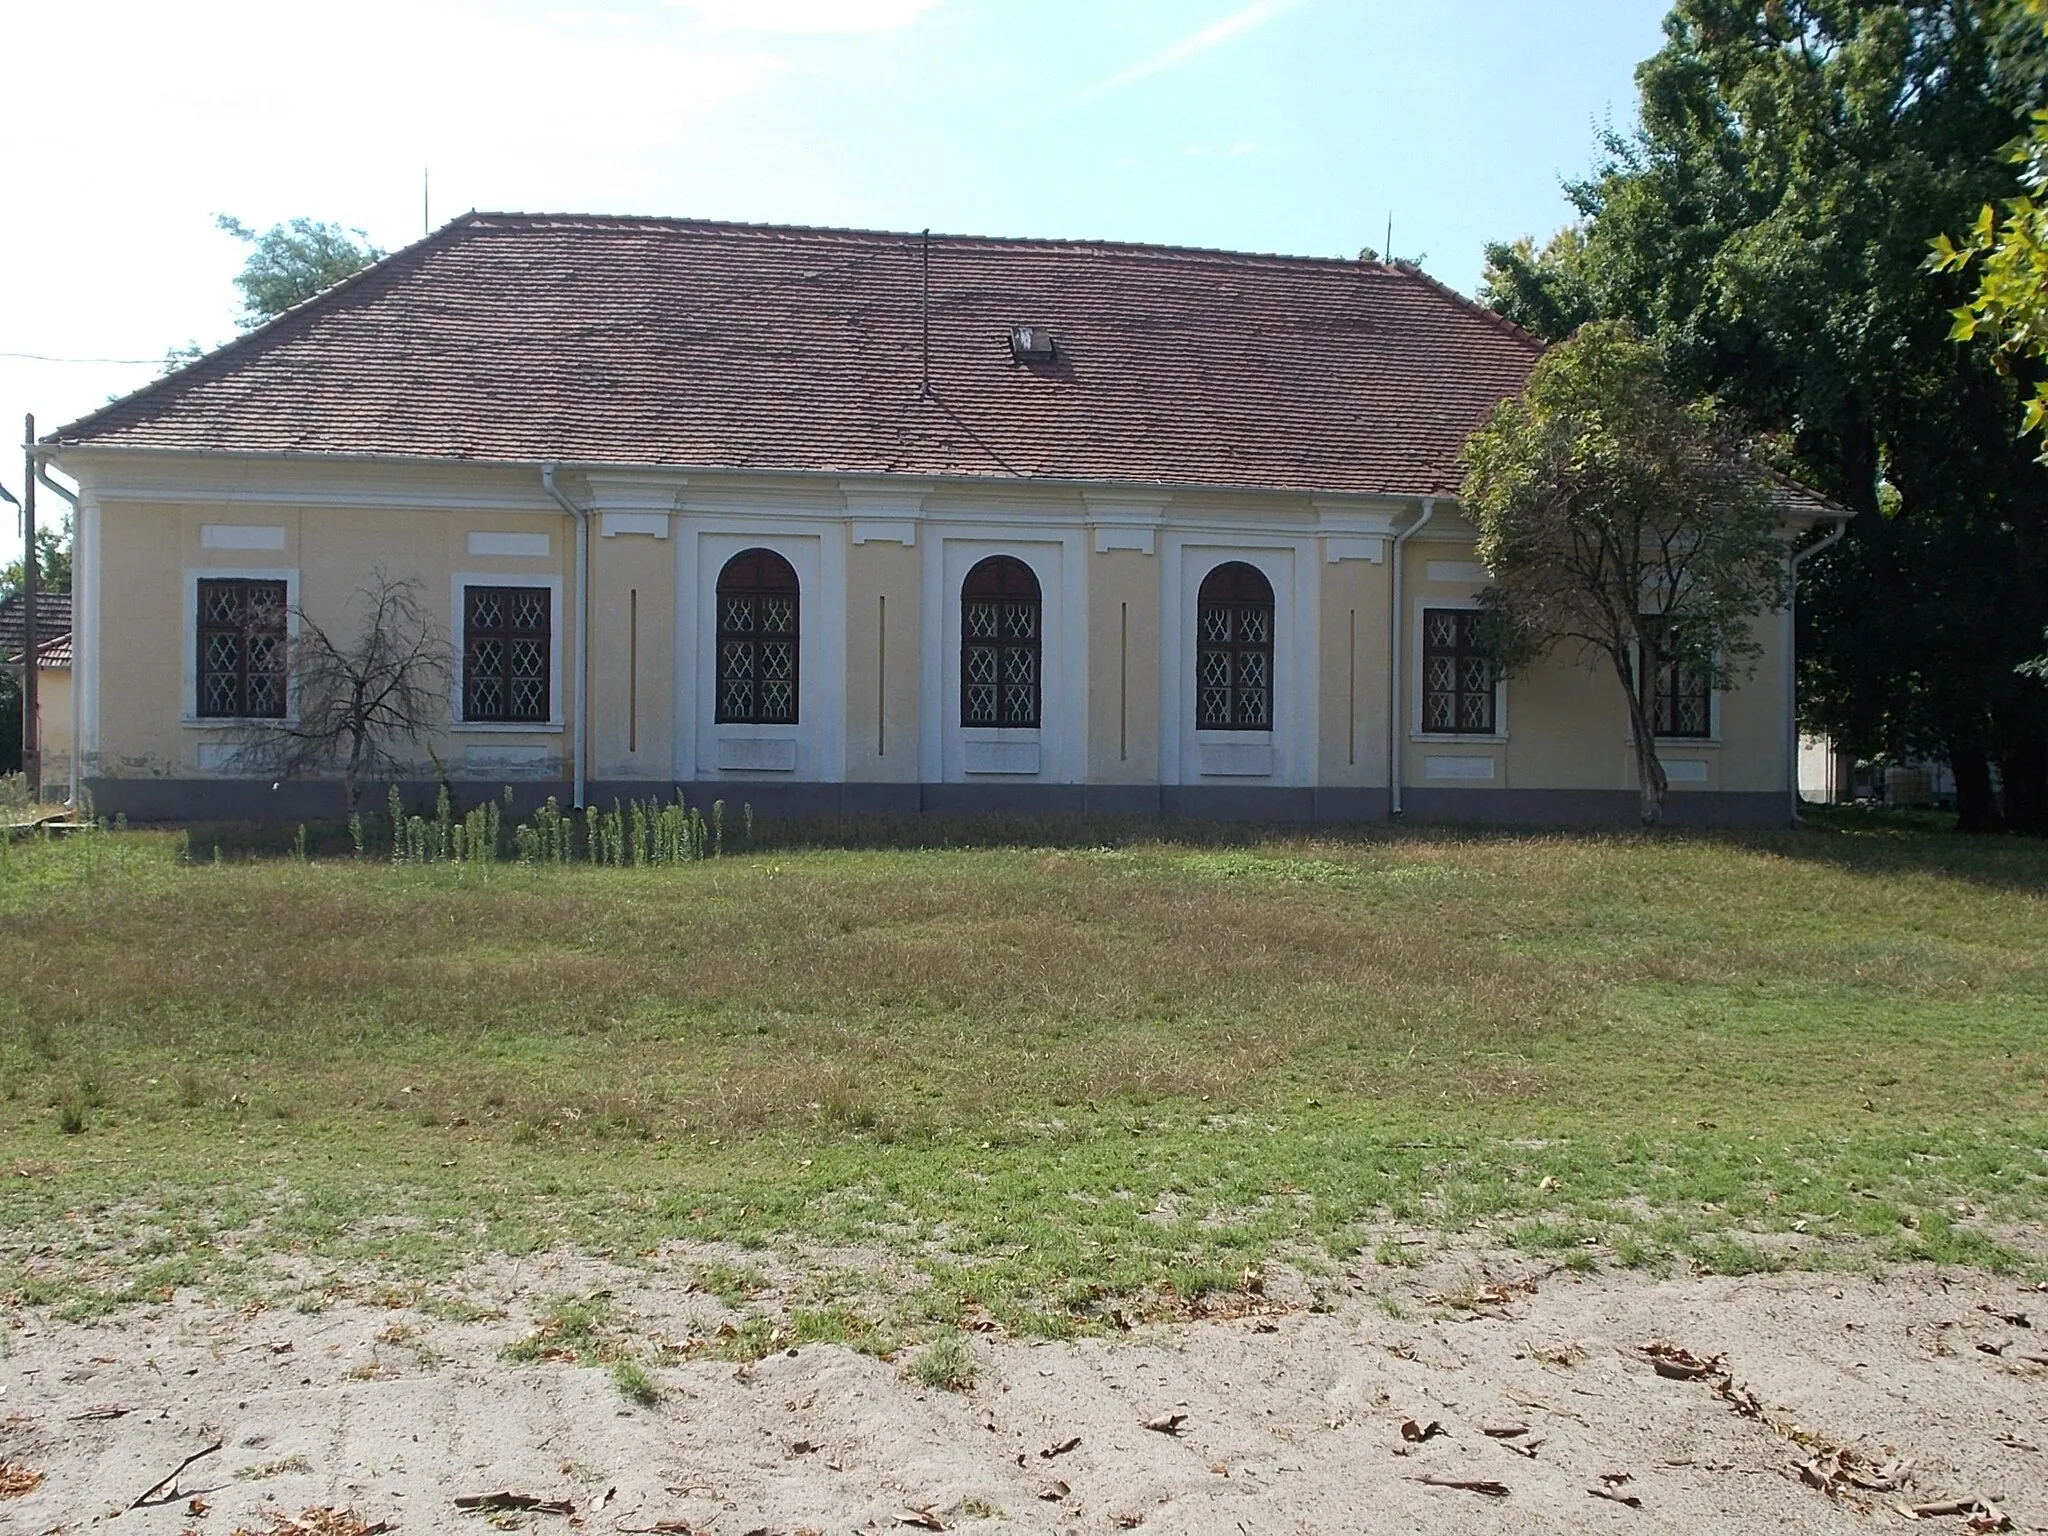 Photo showing: : Zlinszky Mansion (1760s, late Baroque, used storage building) now Zlinszky elementary school. -  Kossuth Lajos Road ( Route 5202 ), Gyón quarter, Dabas, Pest County, Hungary.